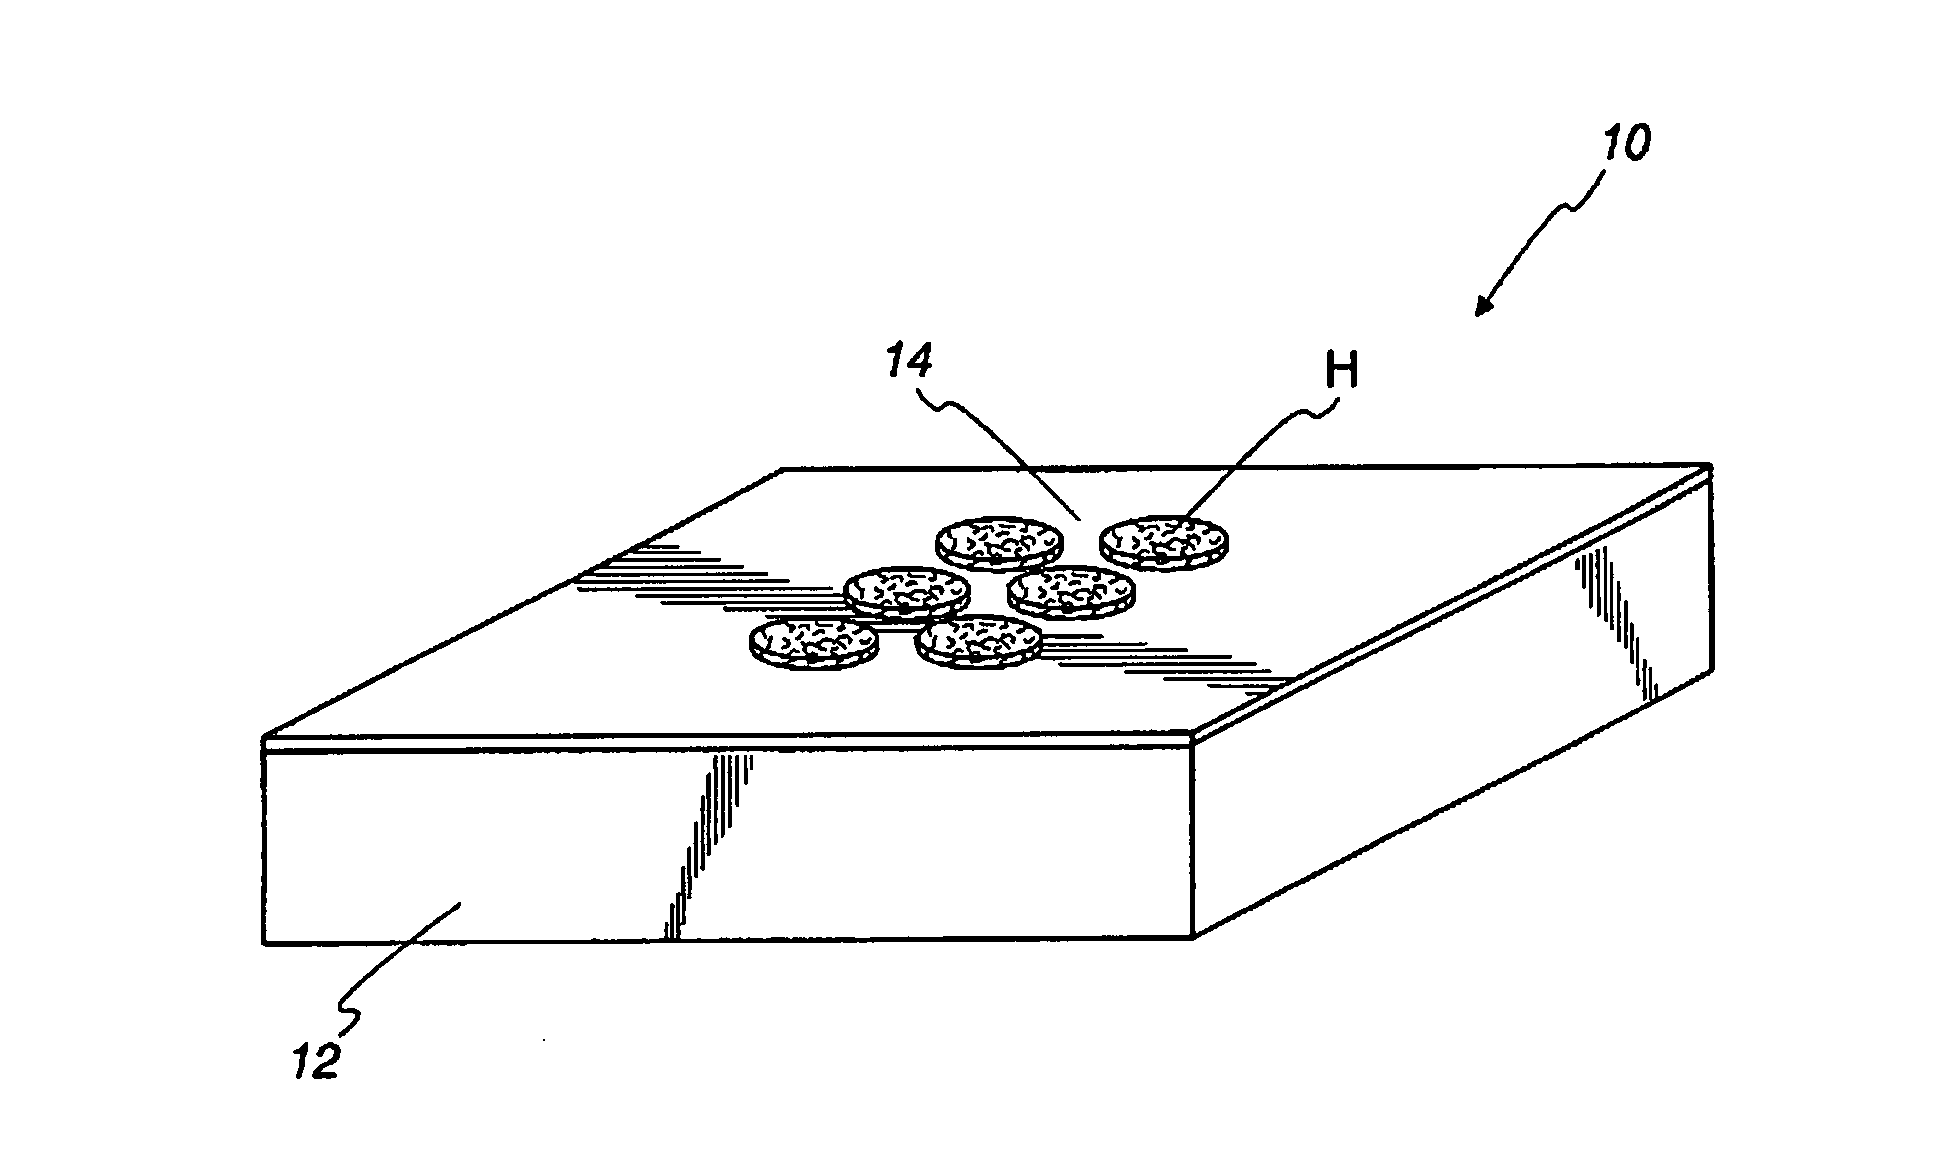 Thin film cooking and food transfer devices and methods